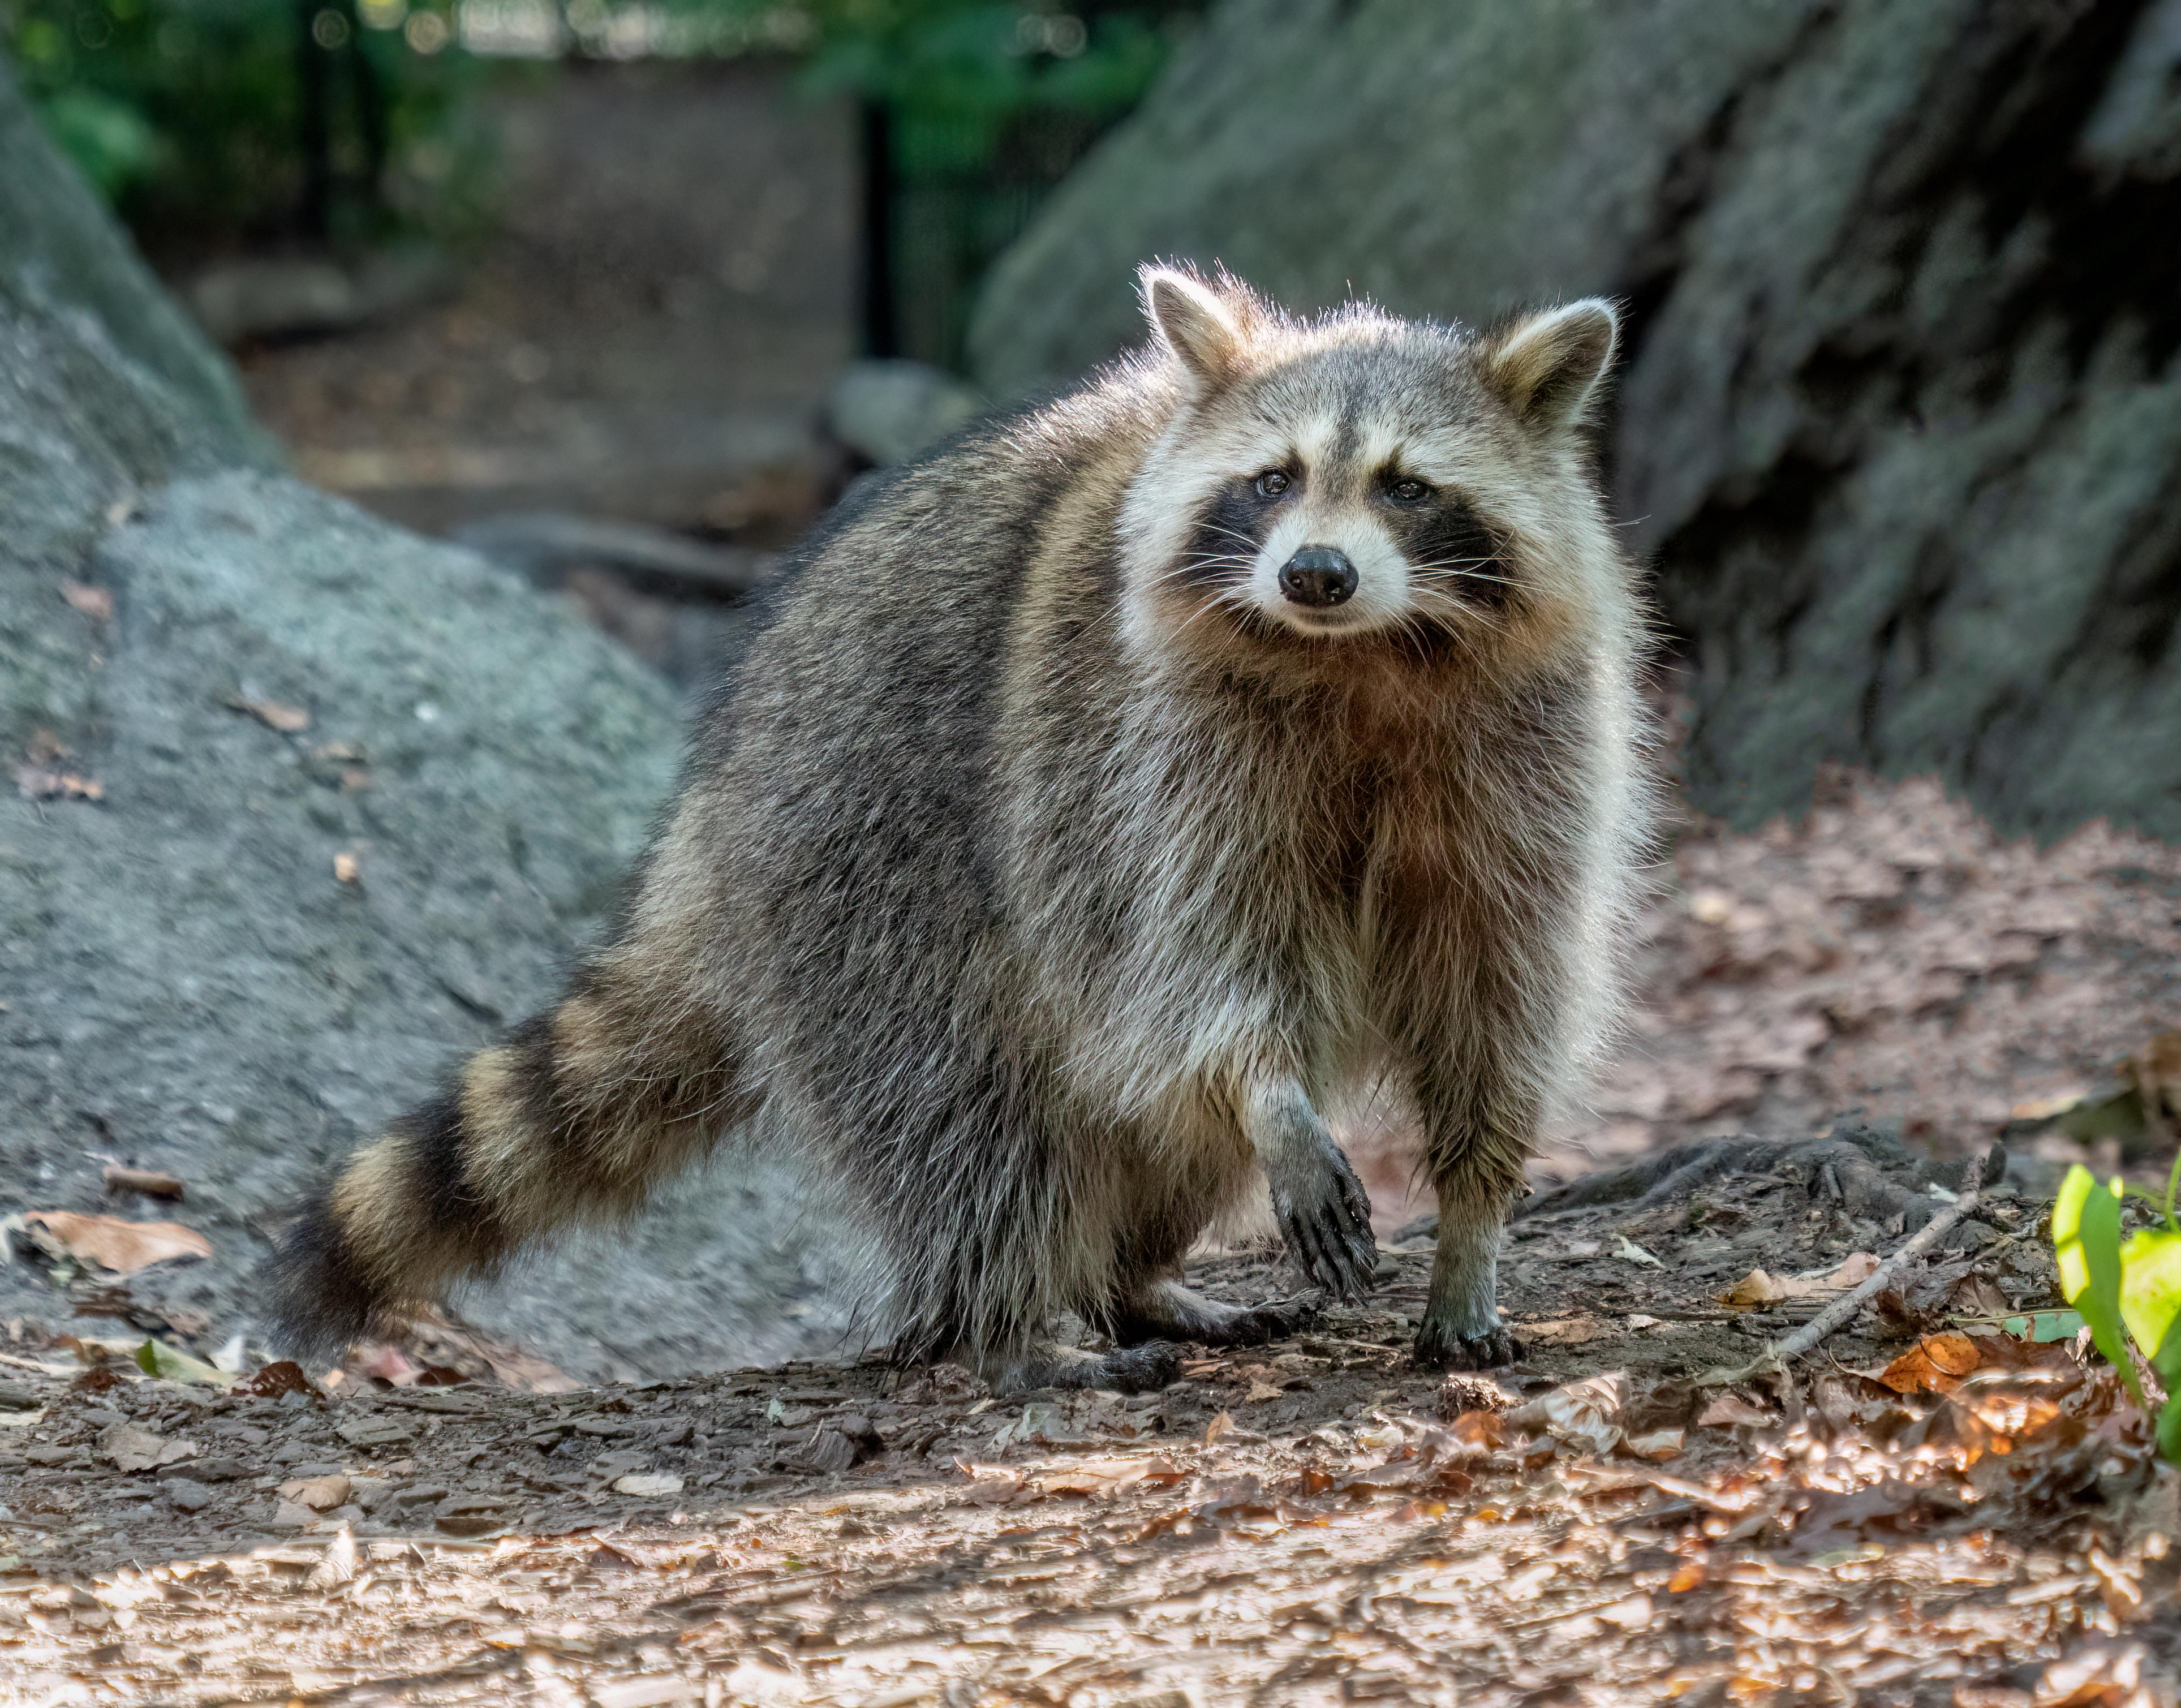 do raccoons have opposable thumbs